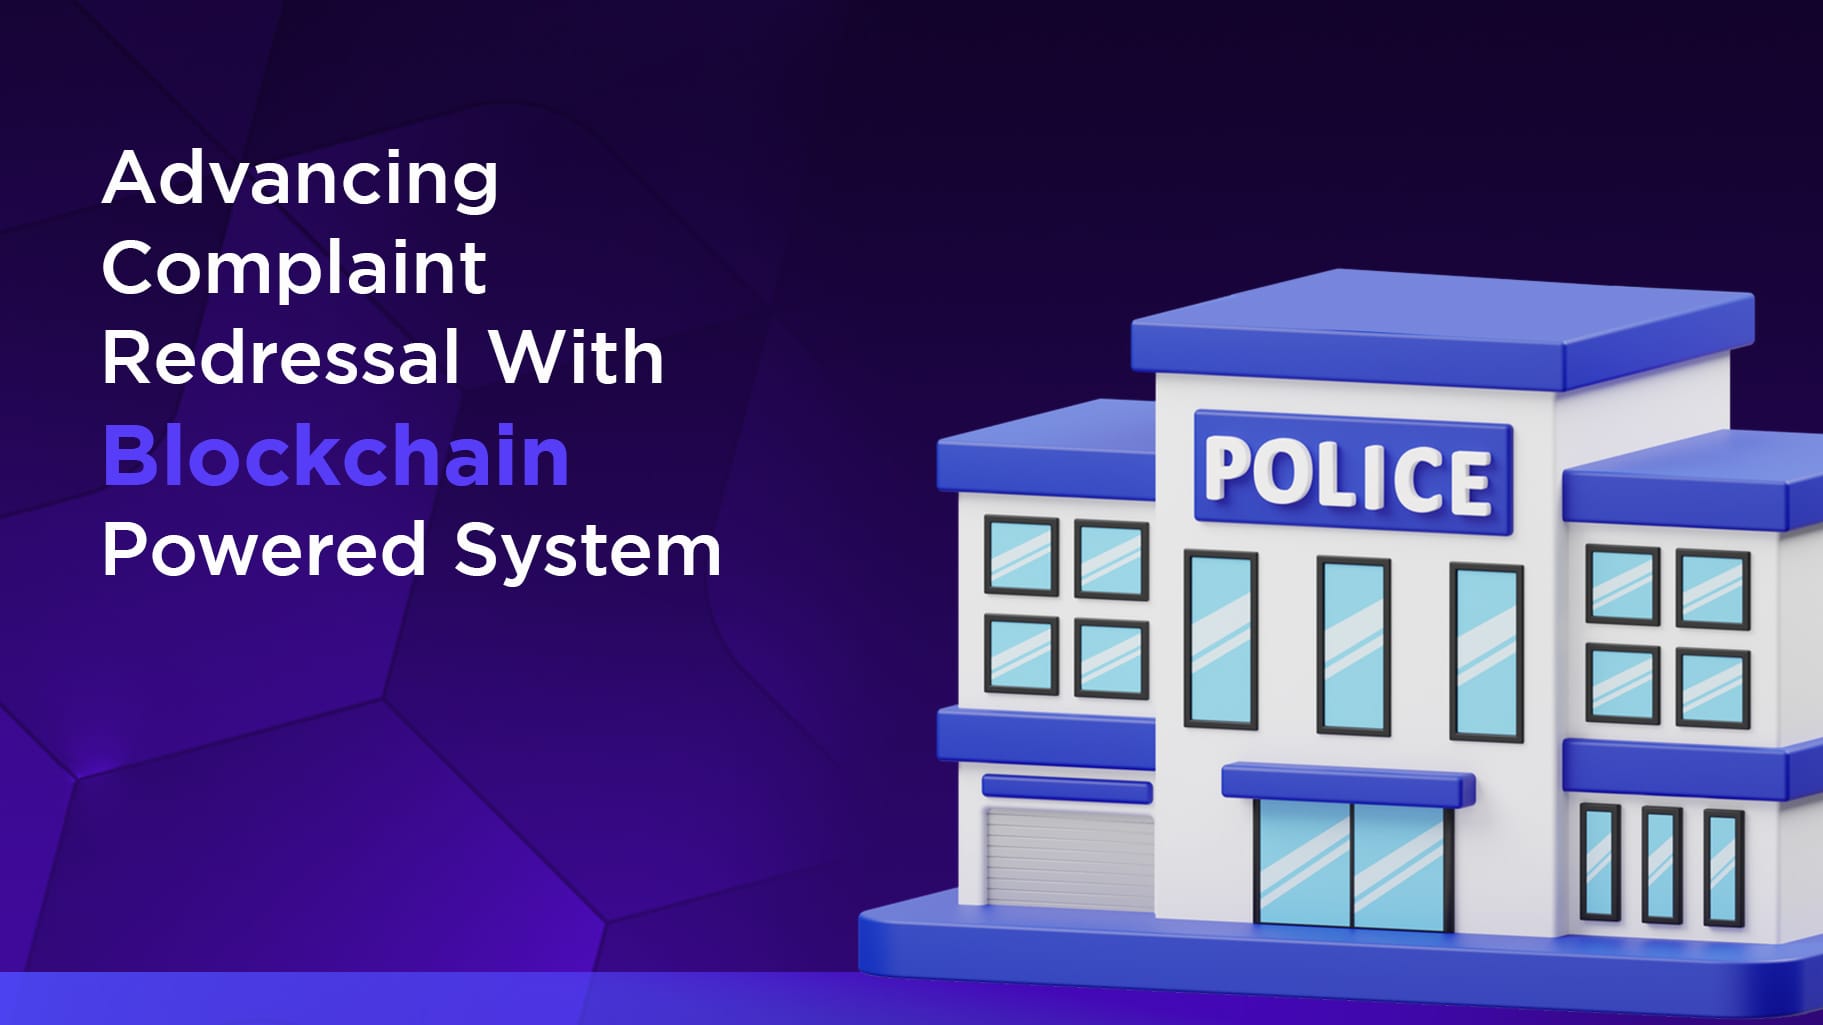 Transforming Complaints Into Solutions, Firozabad Police Adopts Blockchain Powered Complaint Management System